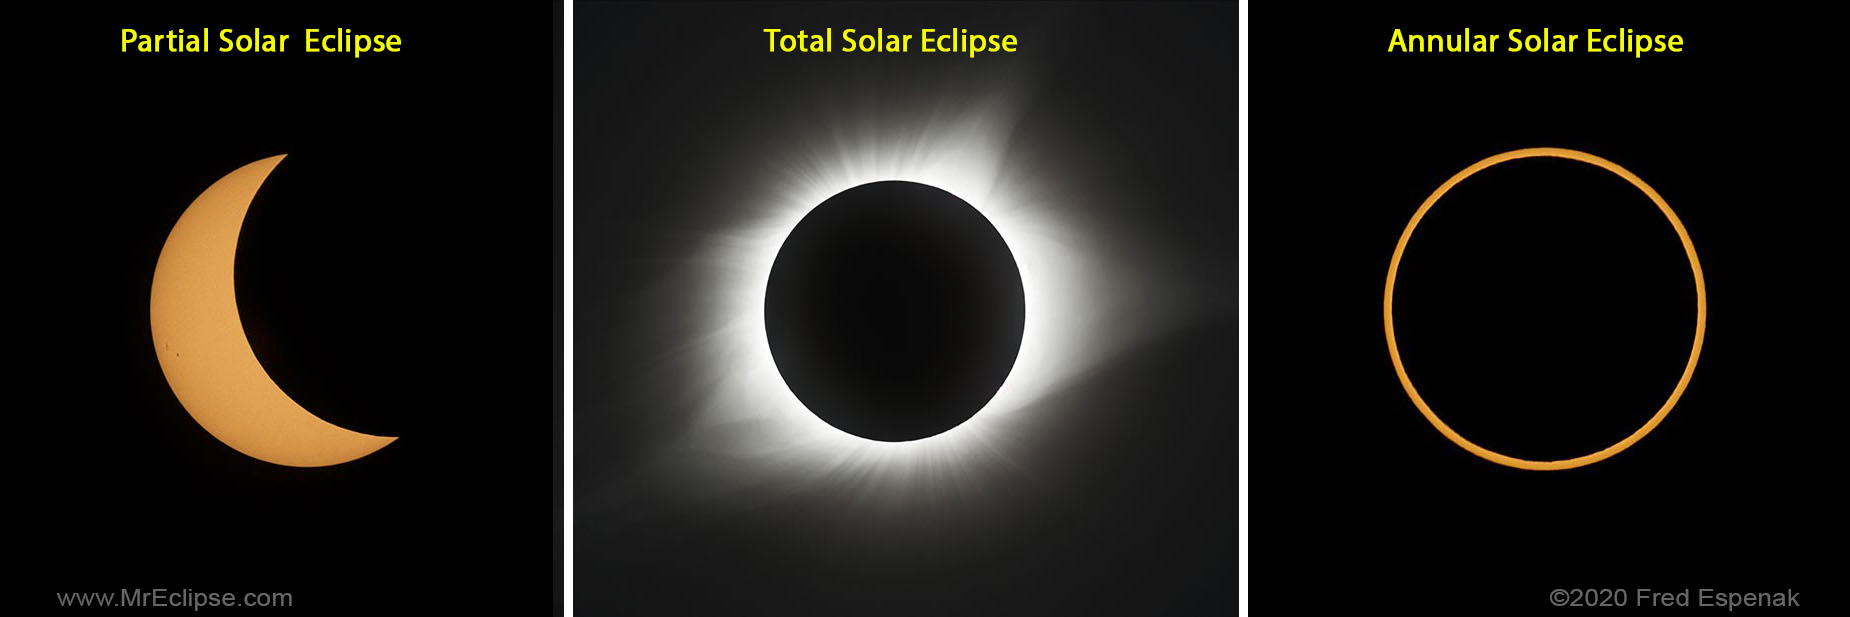 types of solar eclipses